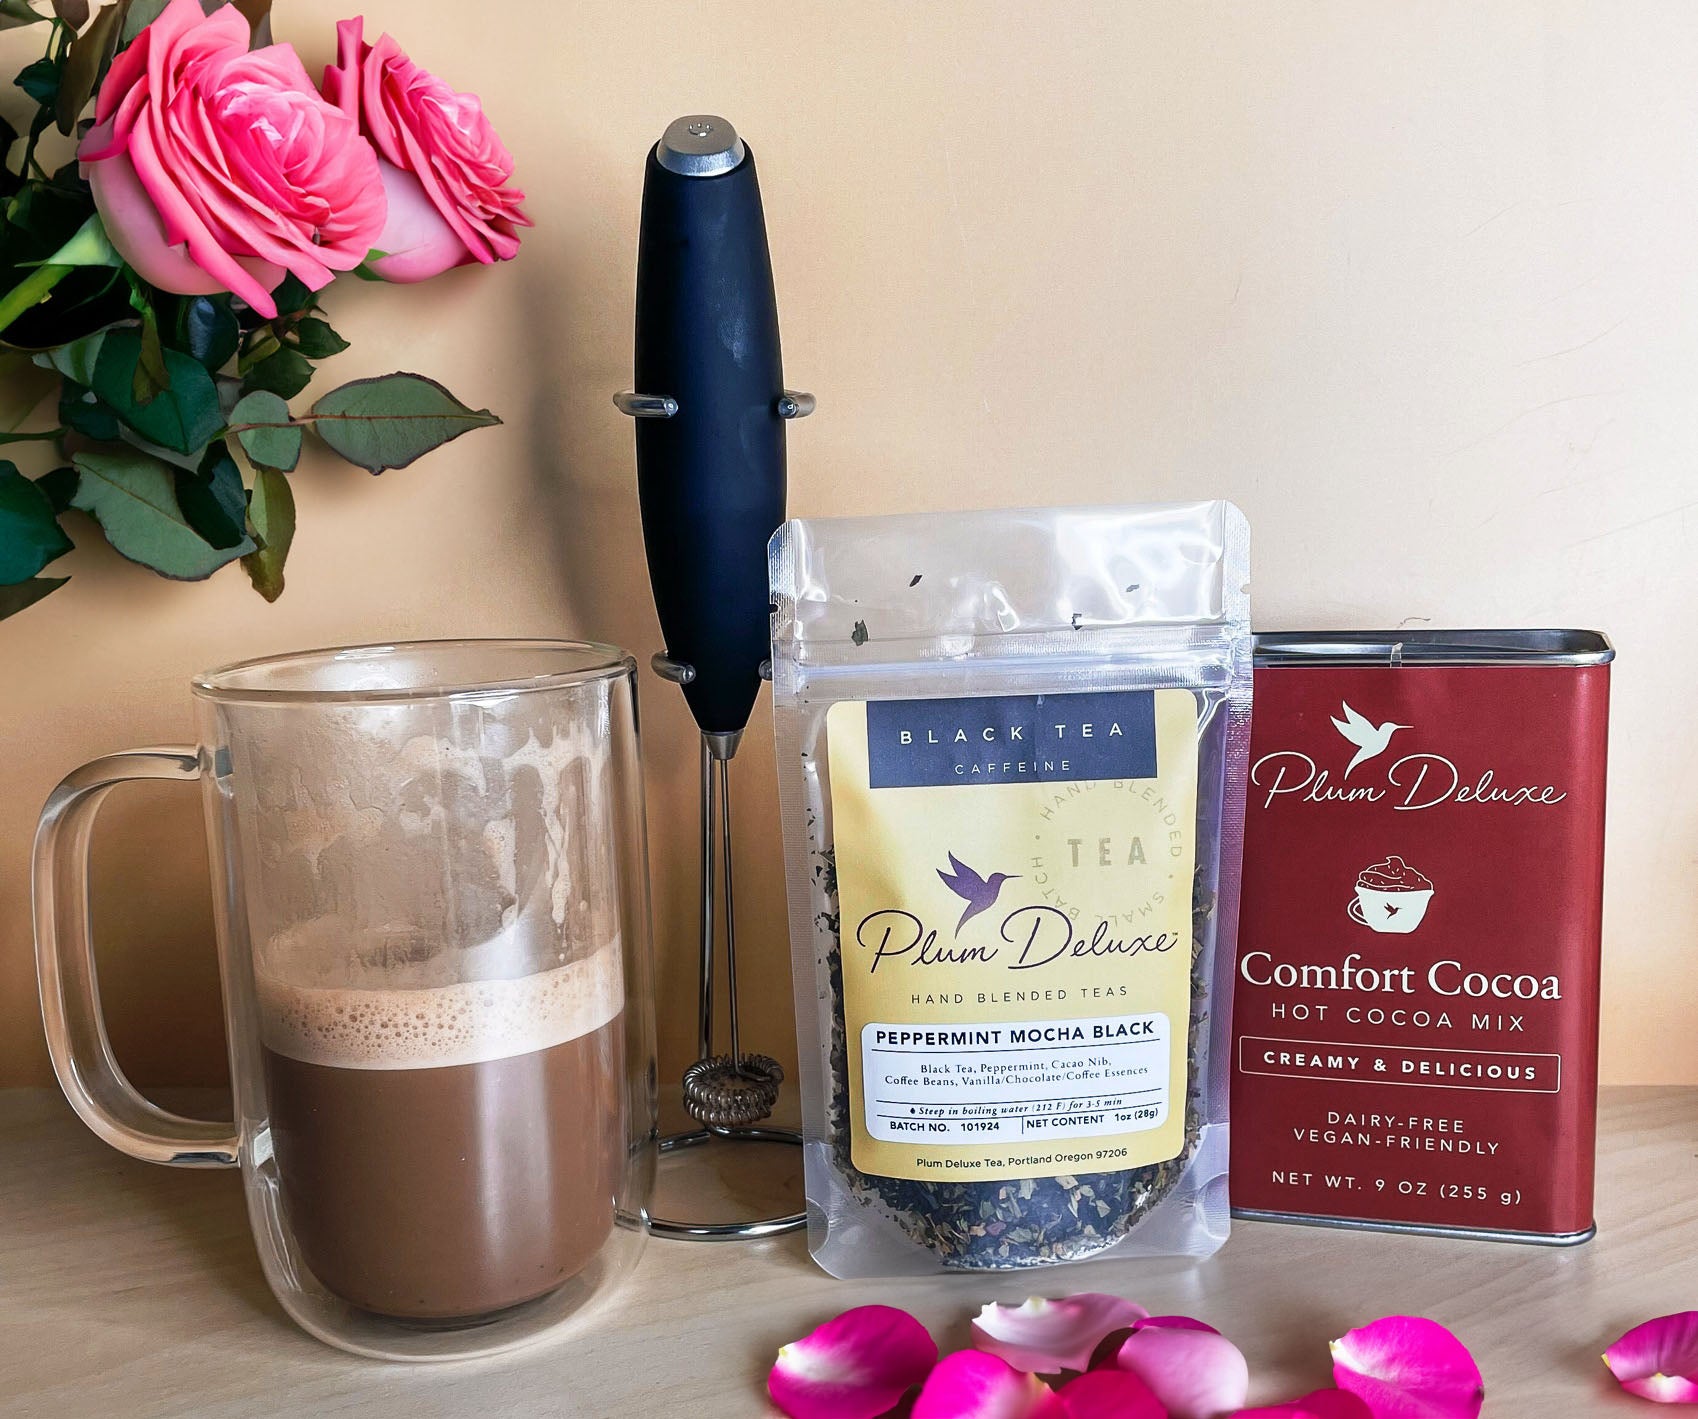 A glass mug of tea-infused cocoa and frothed oat milk sits on a counter next to a Latte Whisk, a bag of Peppermint Mocha loose tea, and a tin of Comfort Cocoa Mix. Pink roses can be seen in the background, and pink rose petals are scattered on the table.